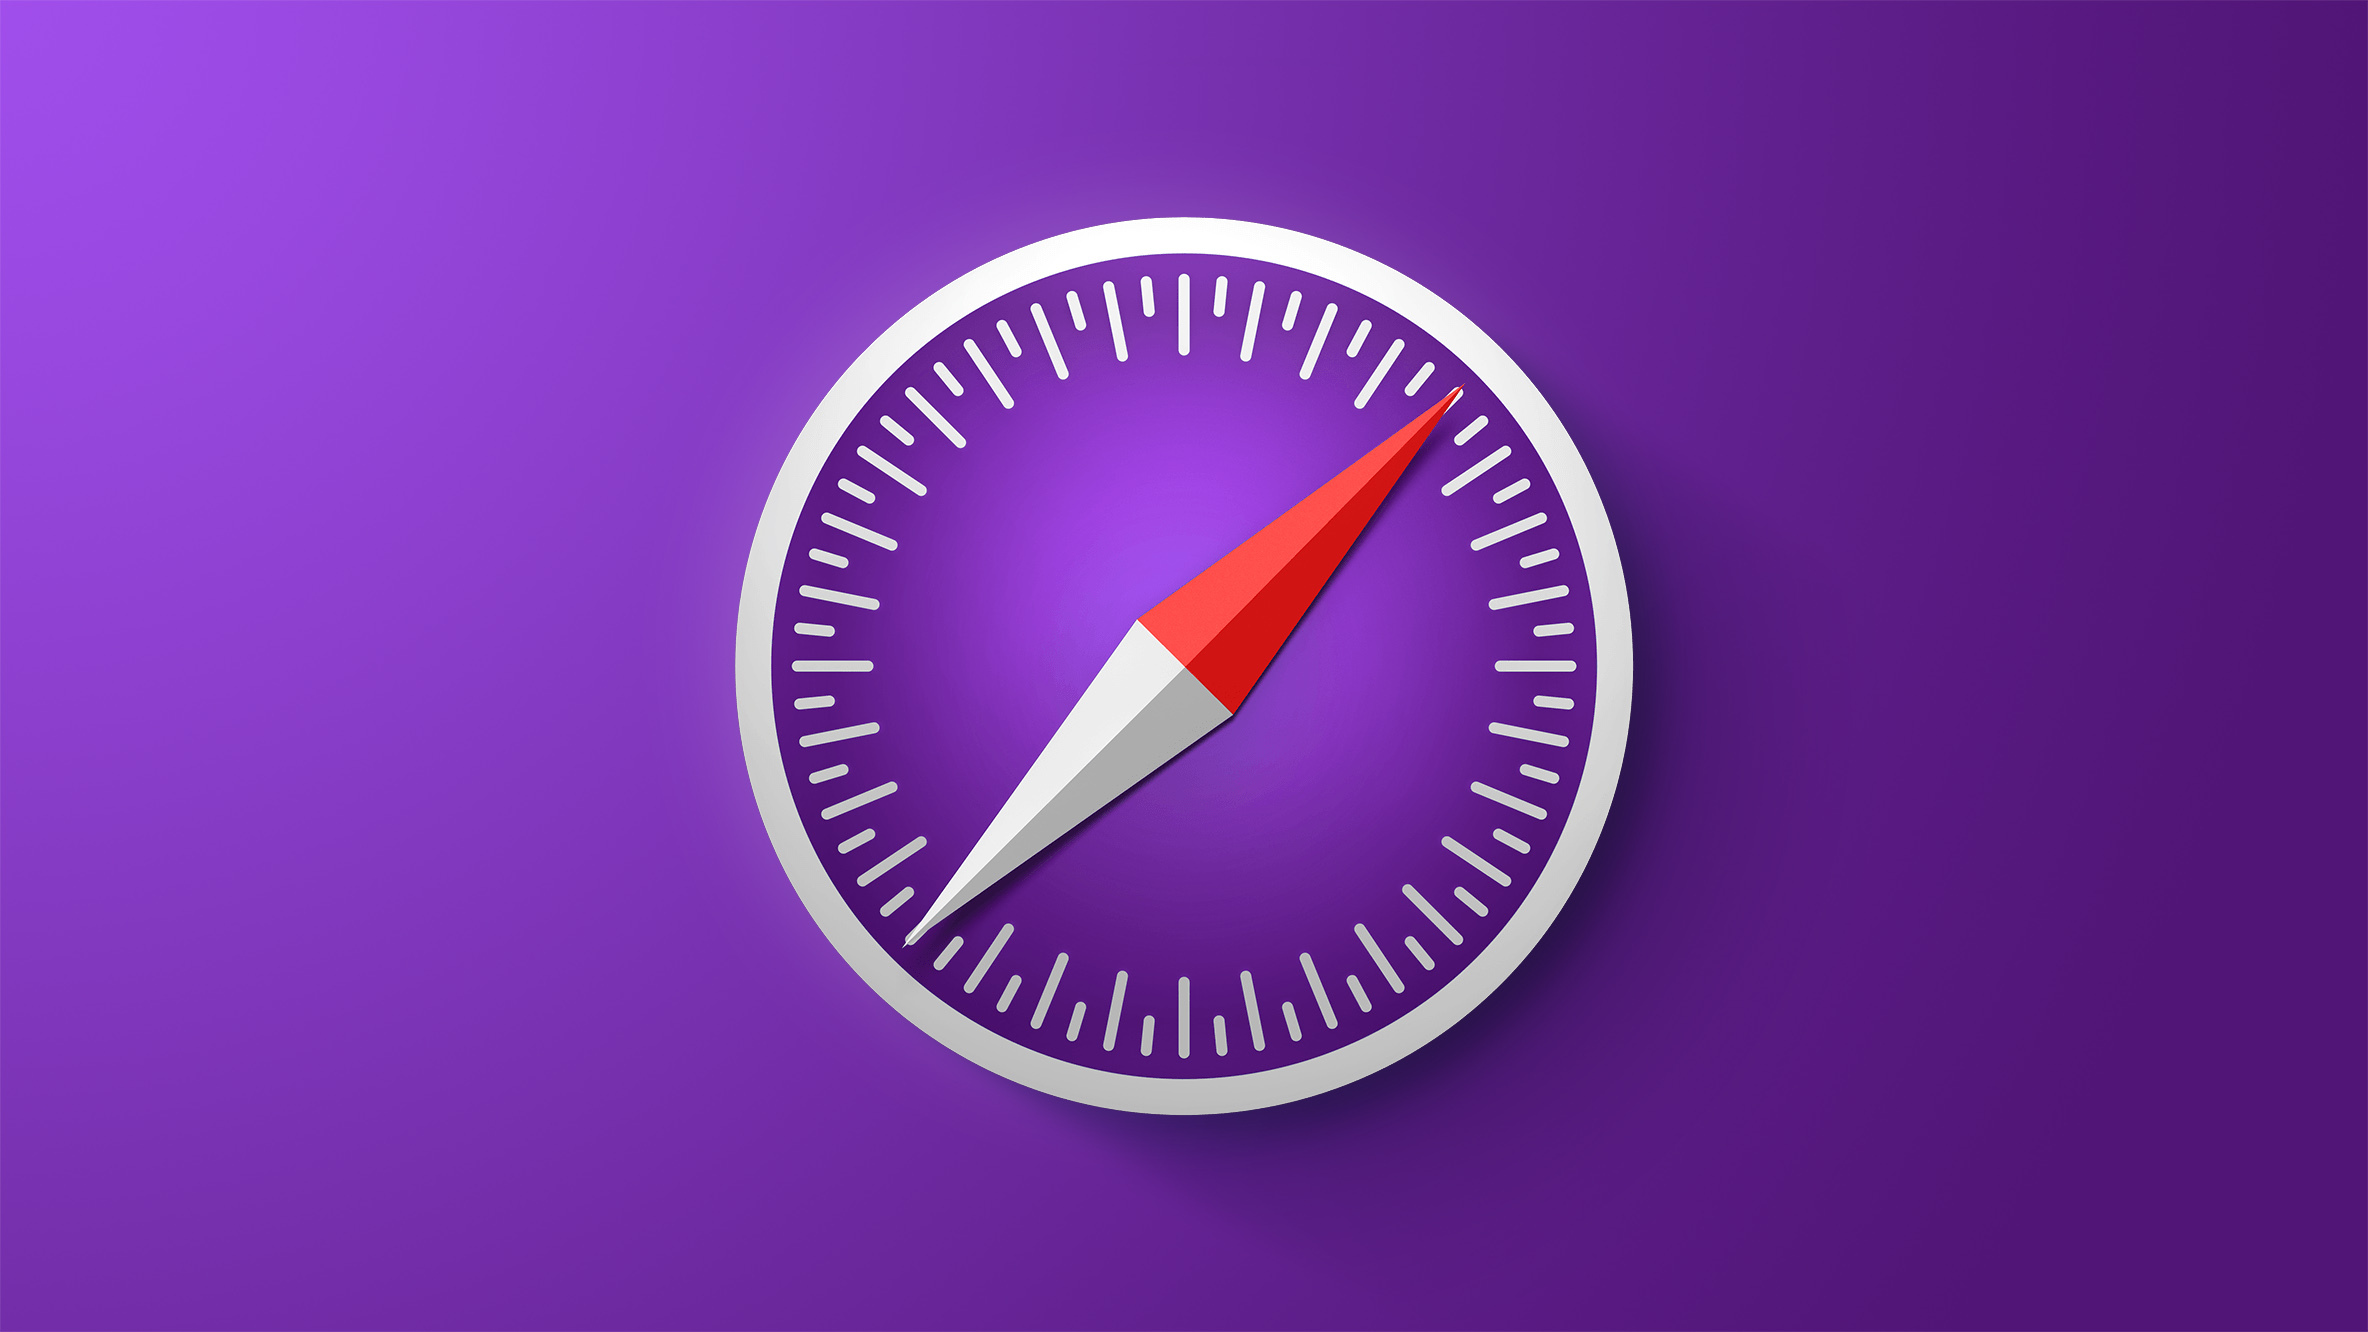 Apple Releases Safari Technology Preview 151 With Bug Fixes and Performance Improvements